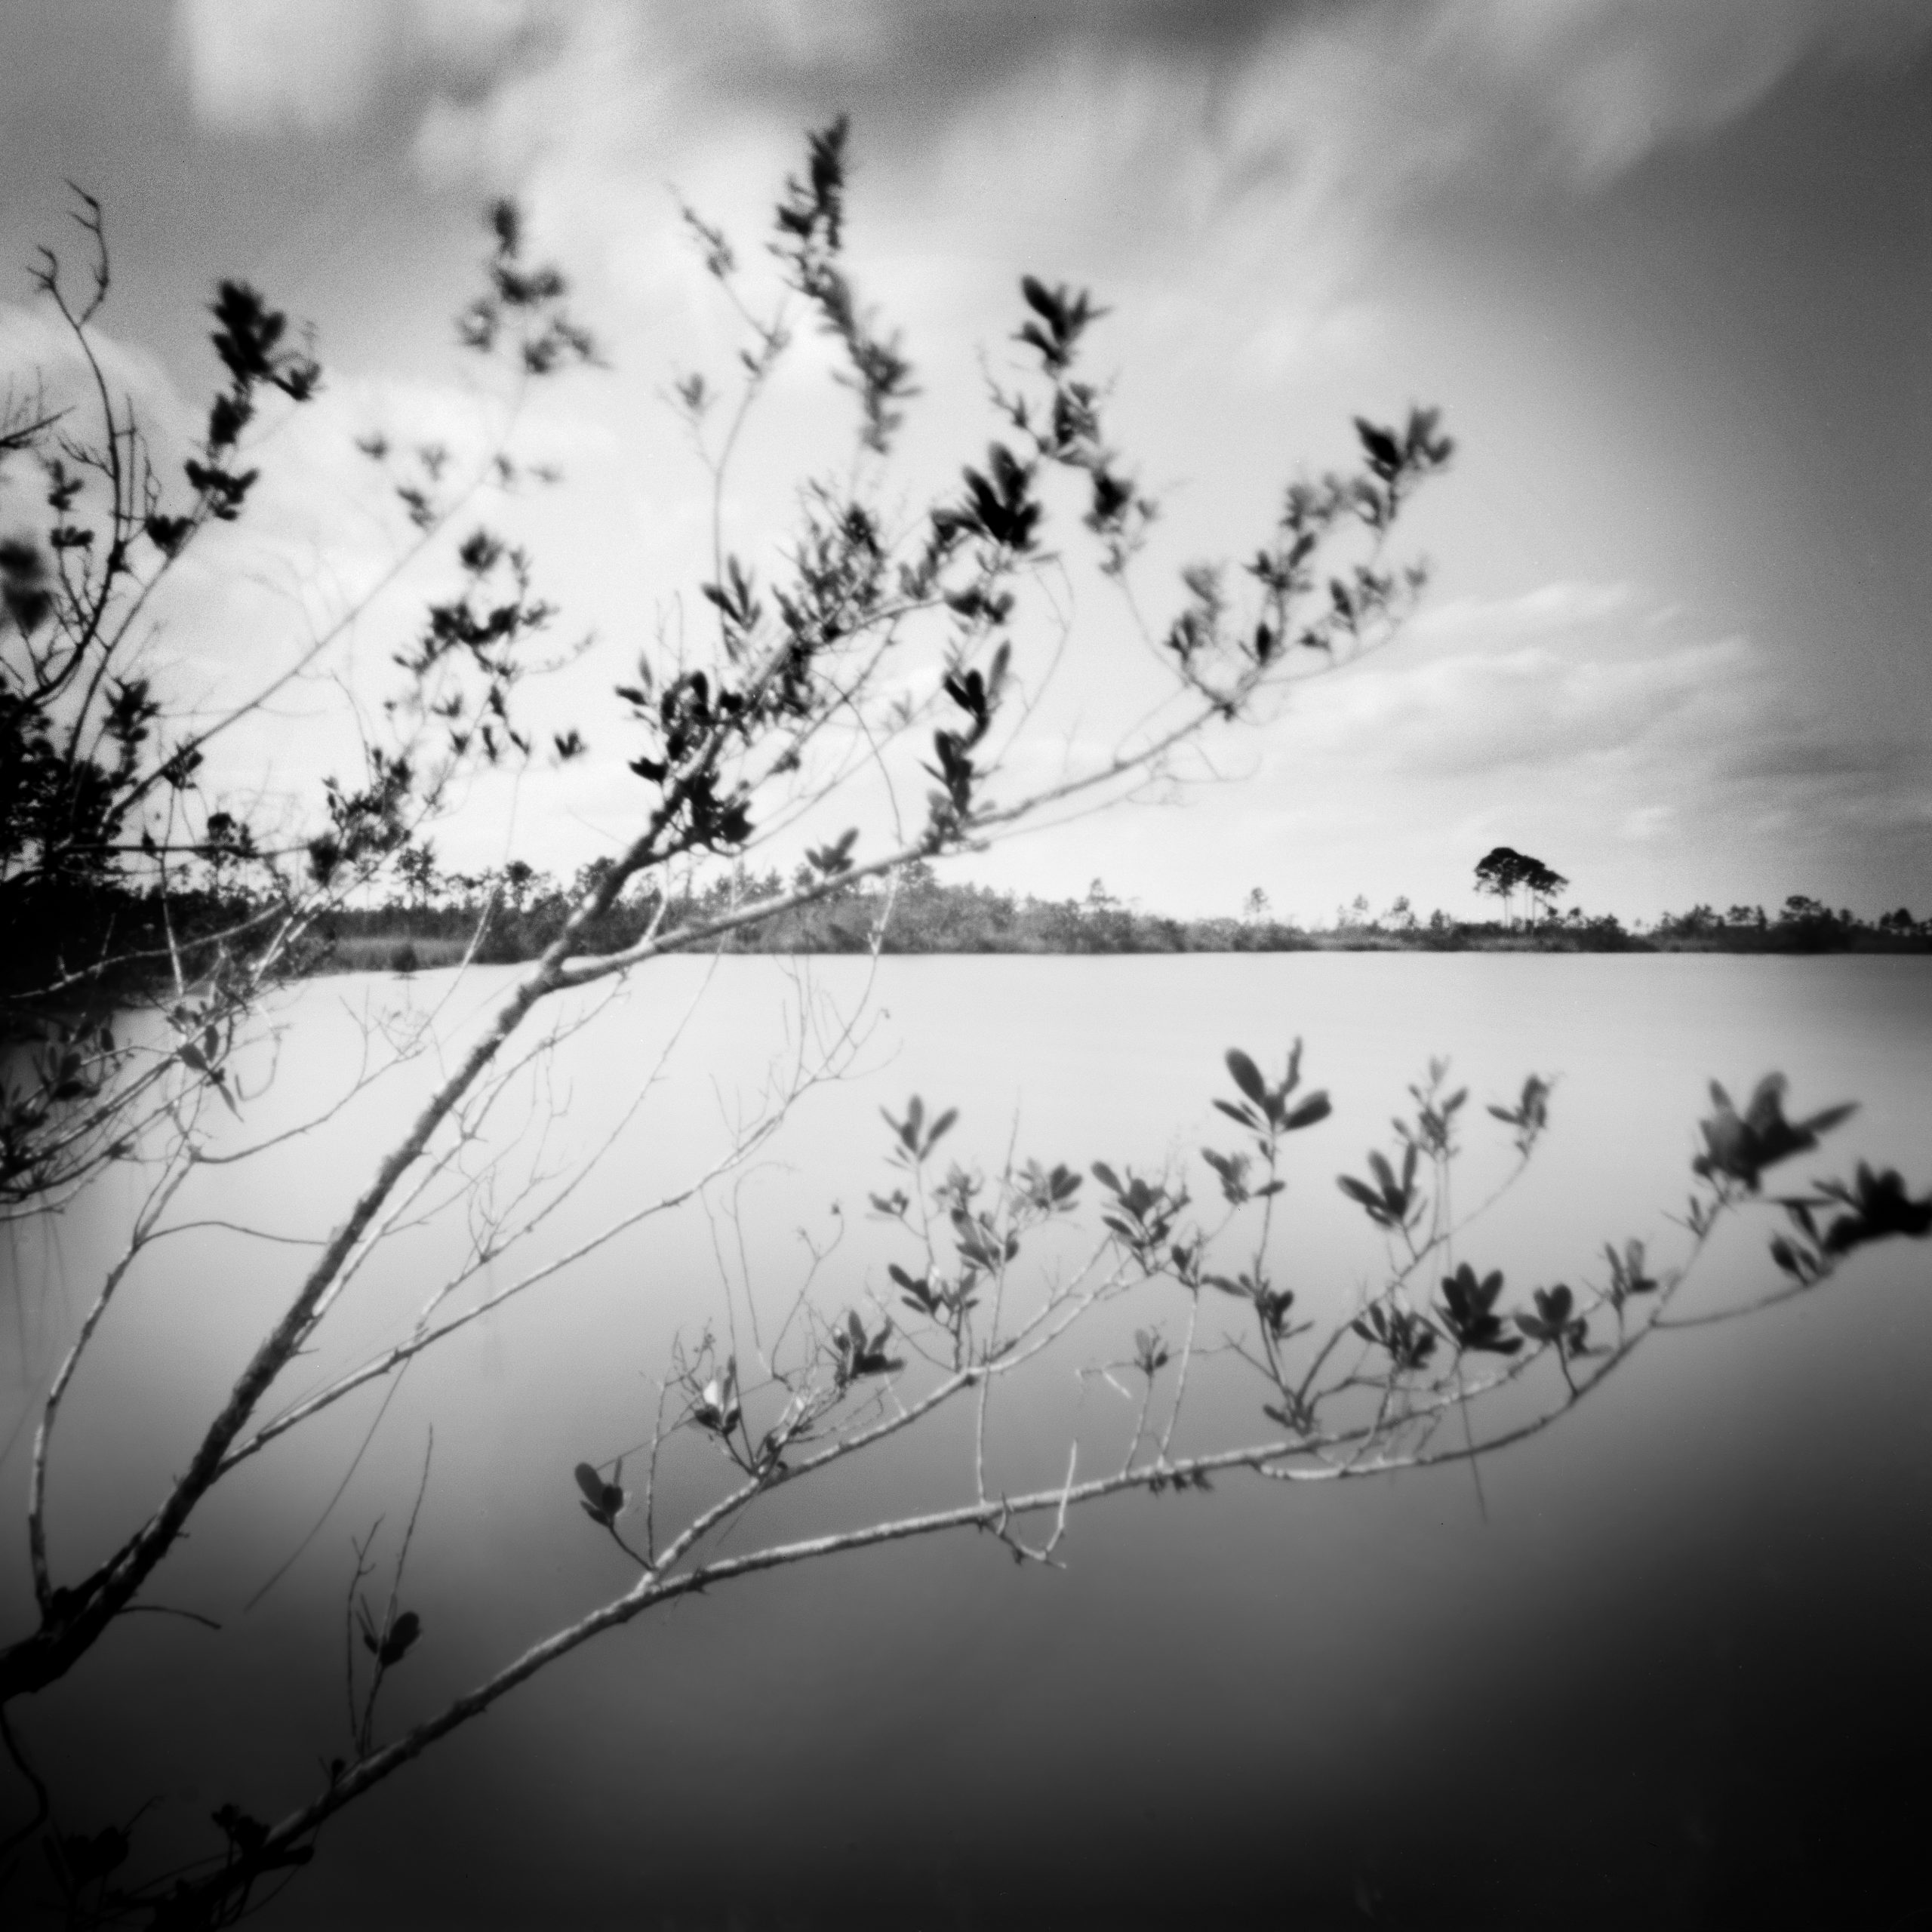 Pinhole Pine Glades Lake - EvergladesBeautiful lake view landscape in the Florida Everglades National Park. This image was captured on black and white film with a 4" x 5" (negative size) large format Pinhole Camera.